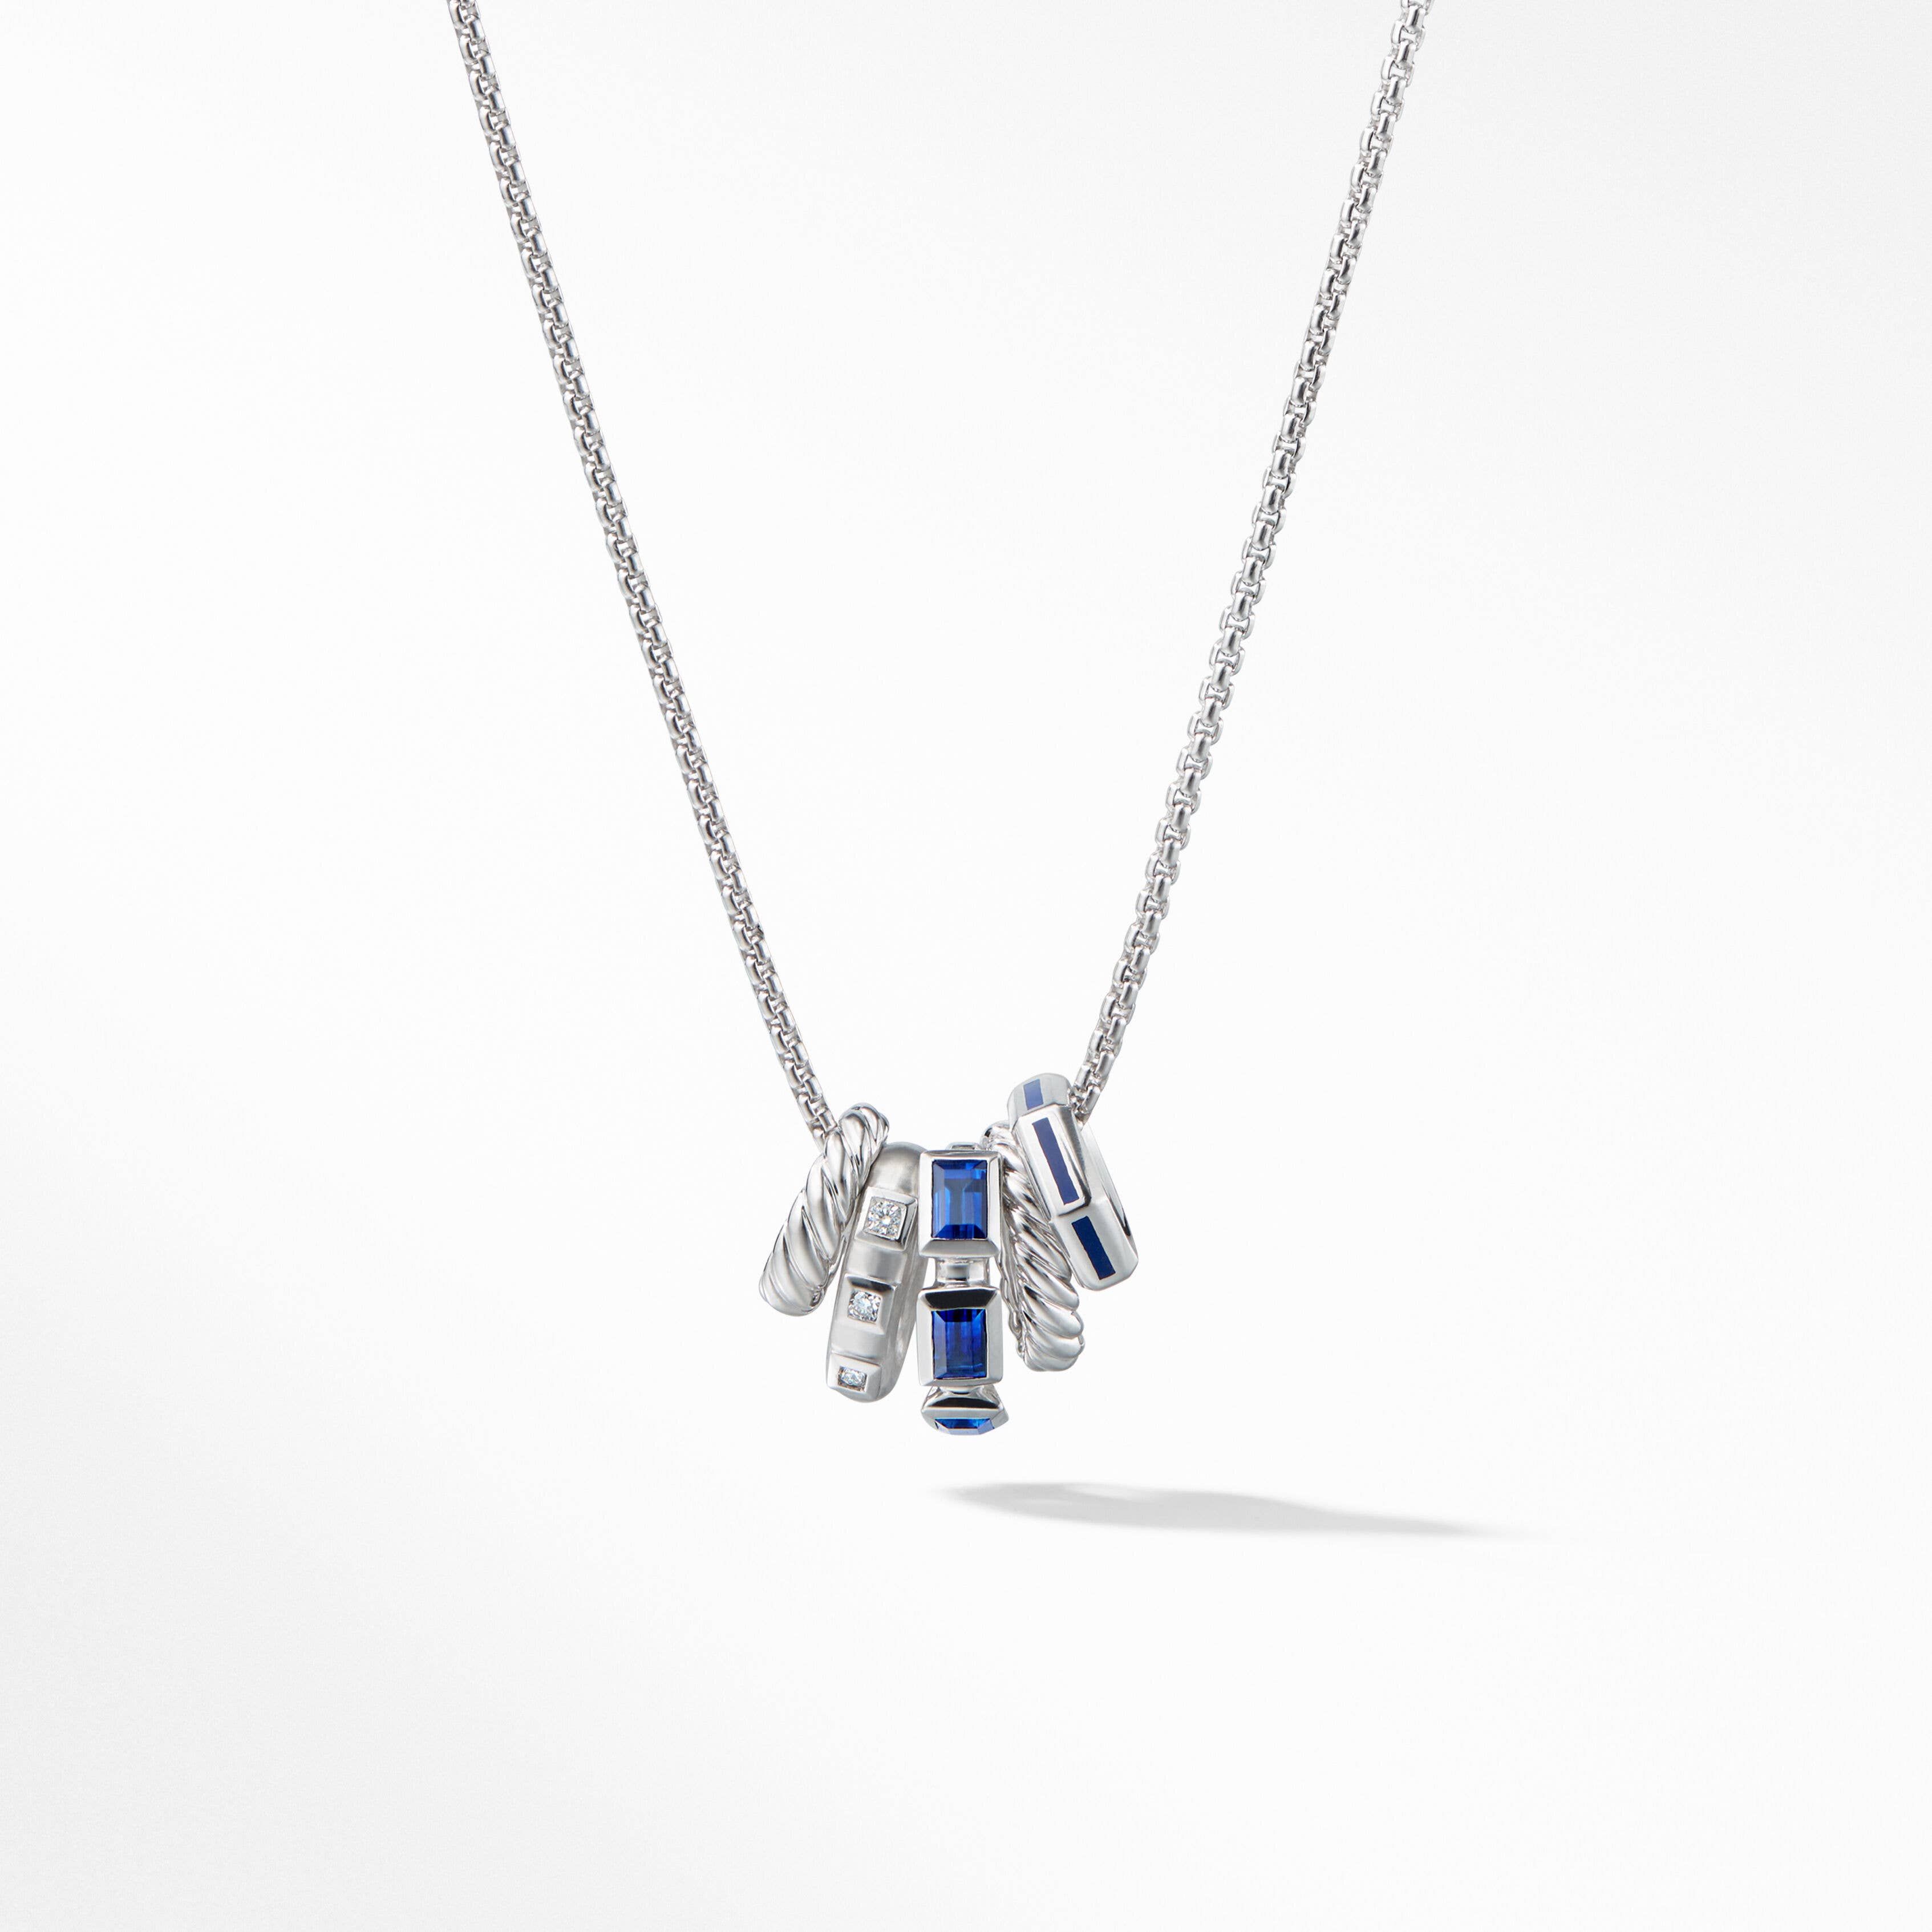 Stax Rondelle Pendant Necklace in 18K White Gold with Sapphires, Blue Enamel and Pavé Diamonds